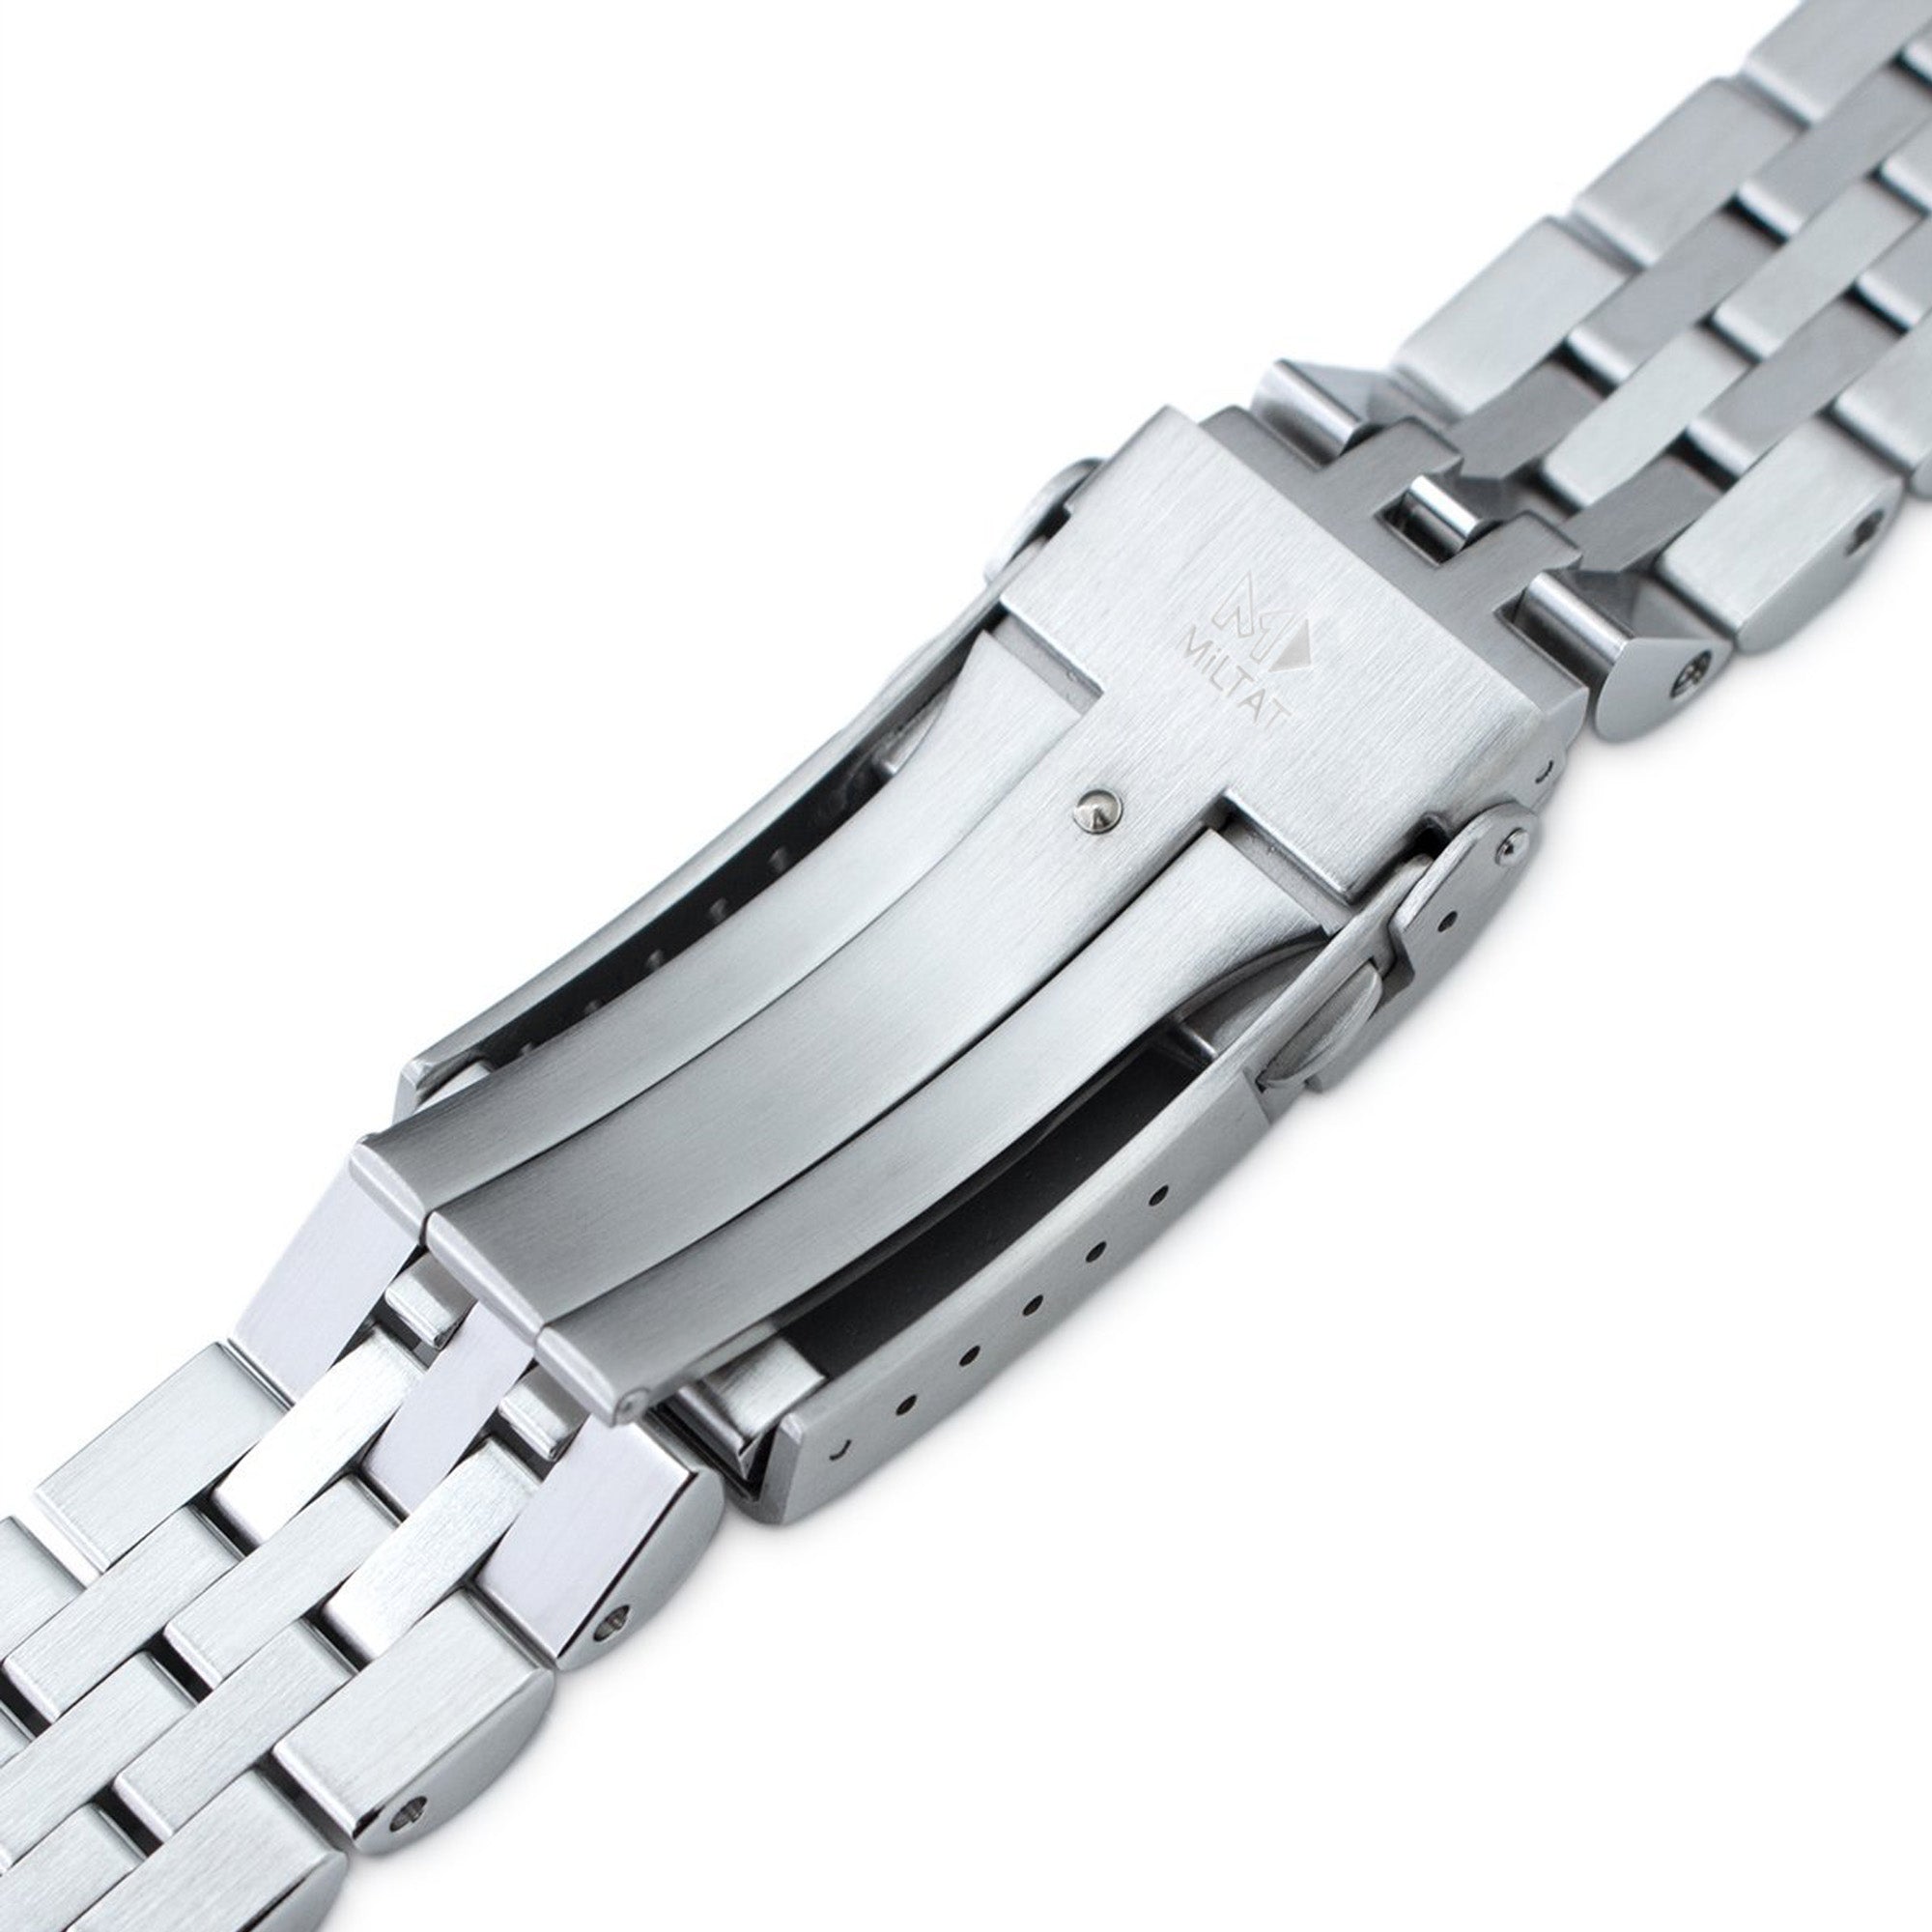 20mm Angus-J Louis JUB Watch Band compatible with Seiko Cocktail SSA345, 316L Stainless Steel V-Clasp